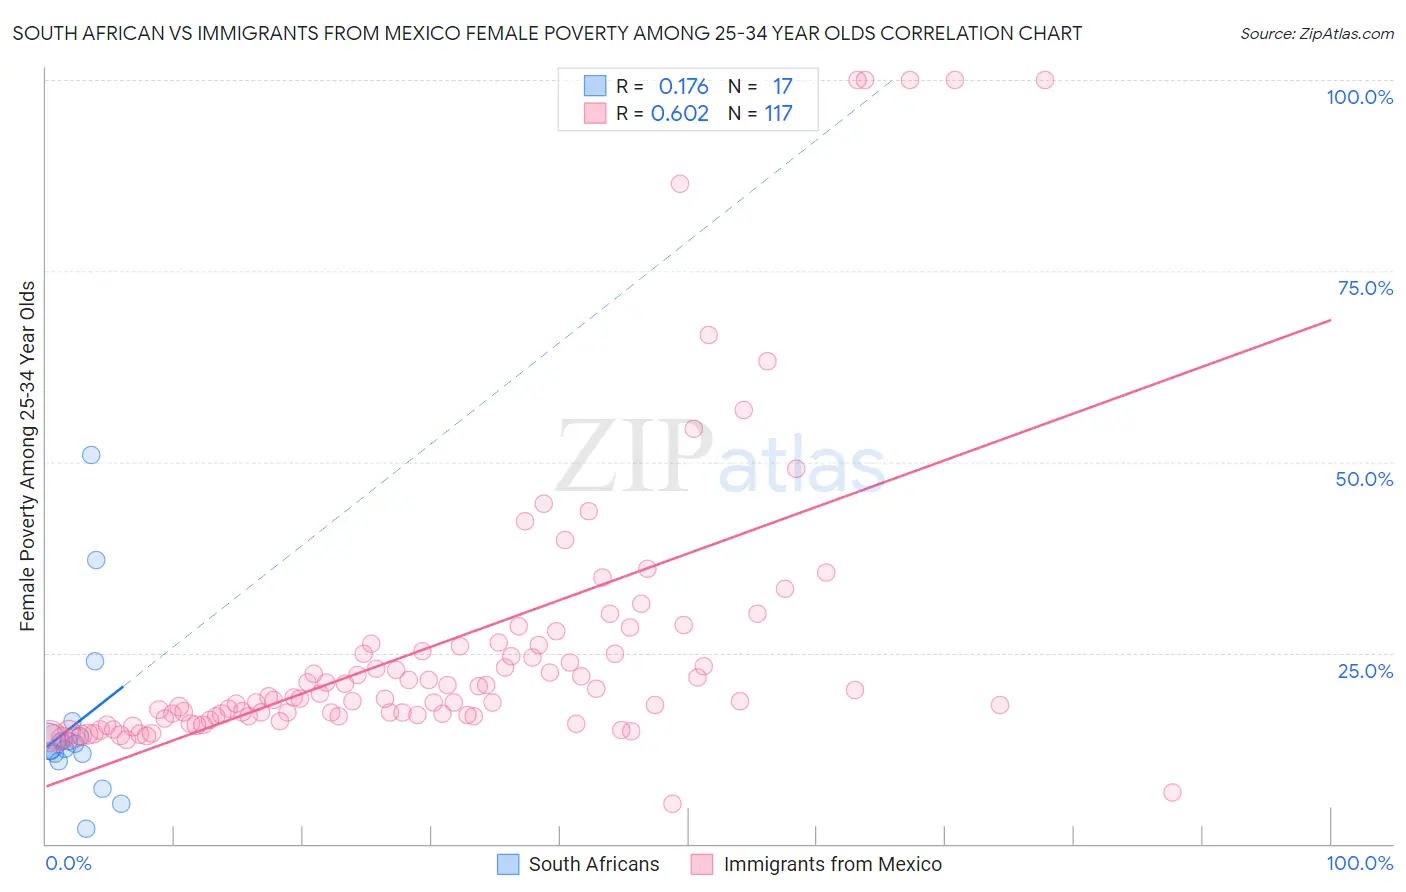 South African vs Immigrants from Mexico Female Poverty Among 25-34 Year Olds